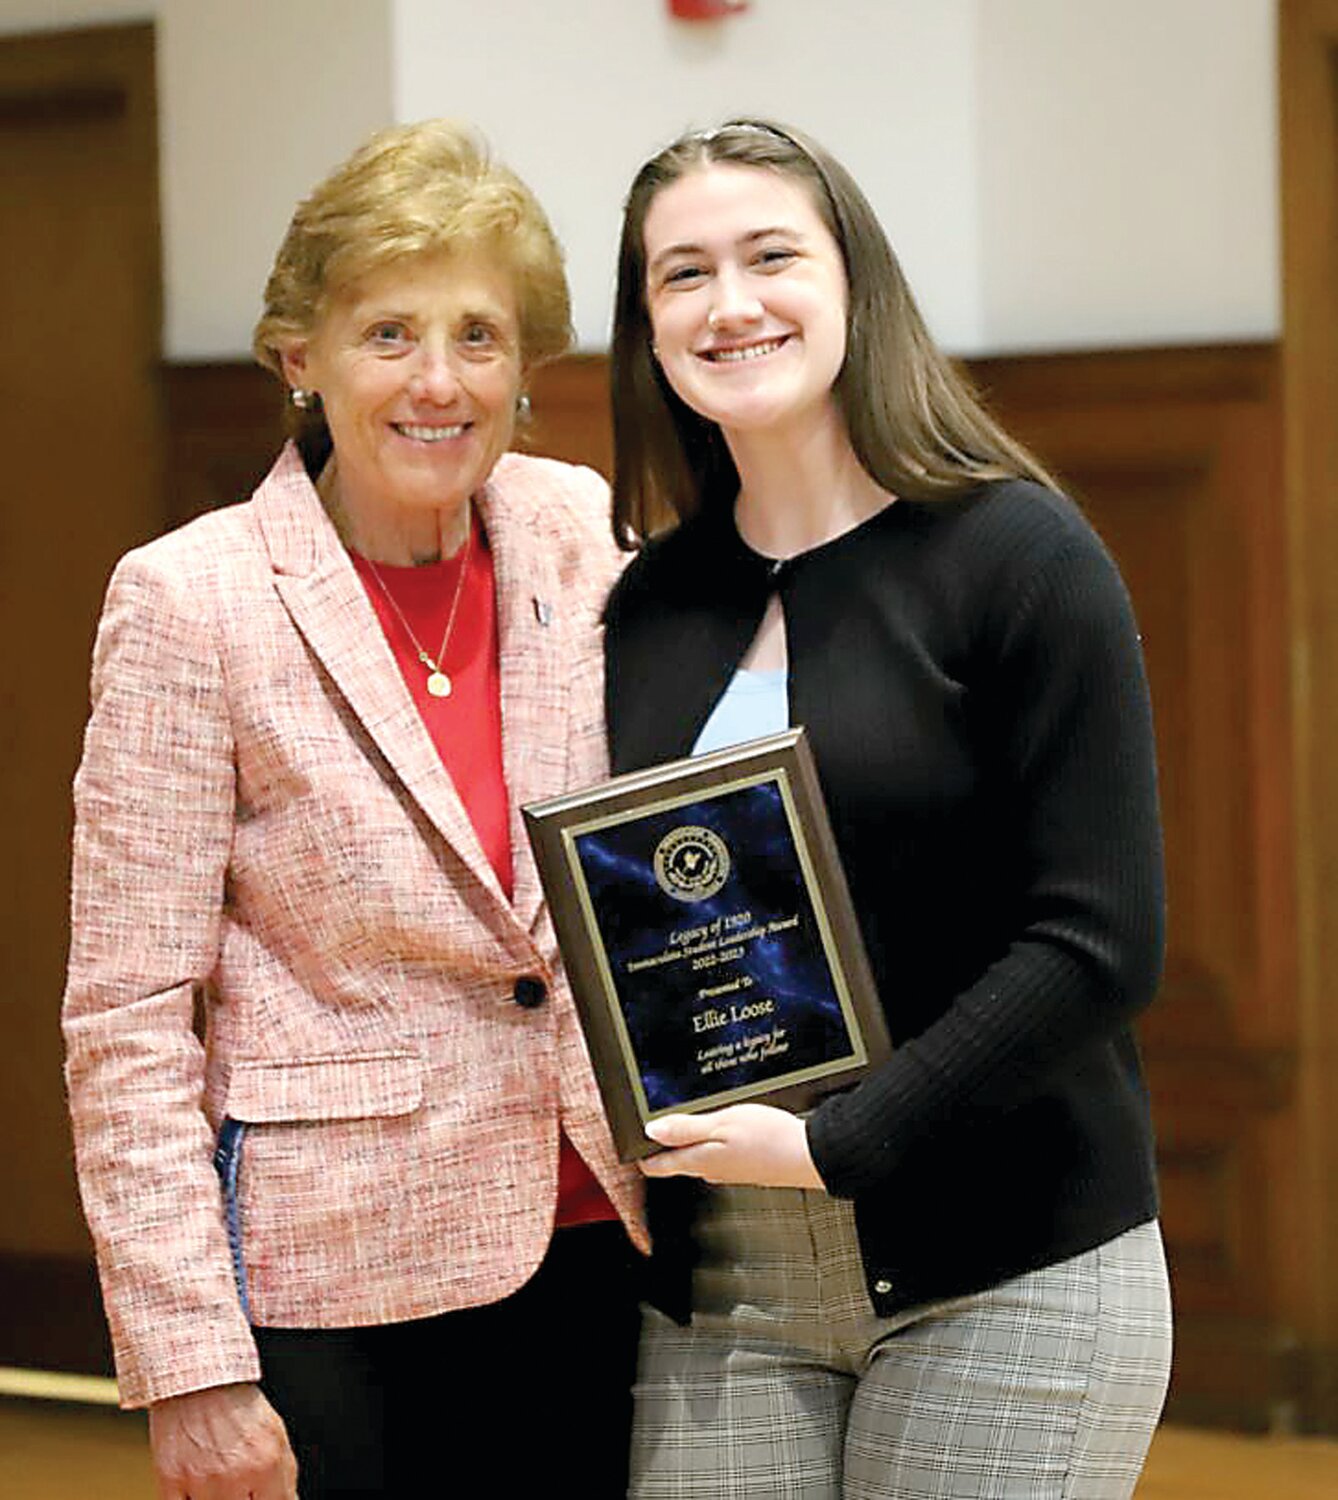 Ellie Loose, right, with Immaculata University President Barbara Lettiere.